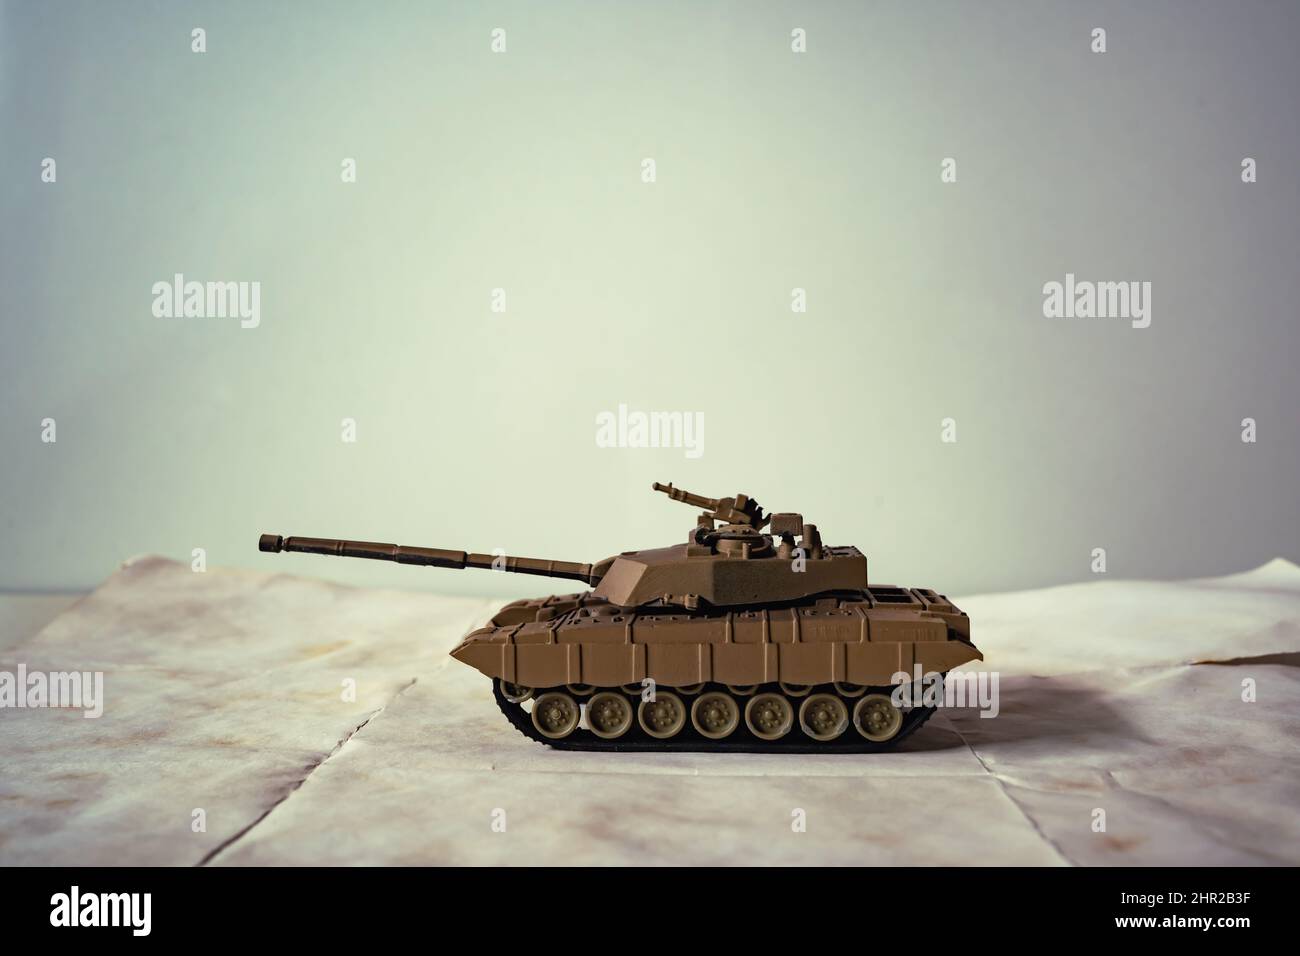 Plastic toy tank with copy space Stock Photo